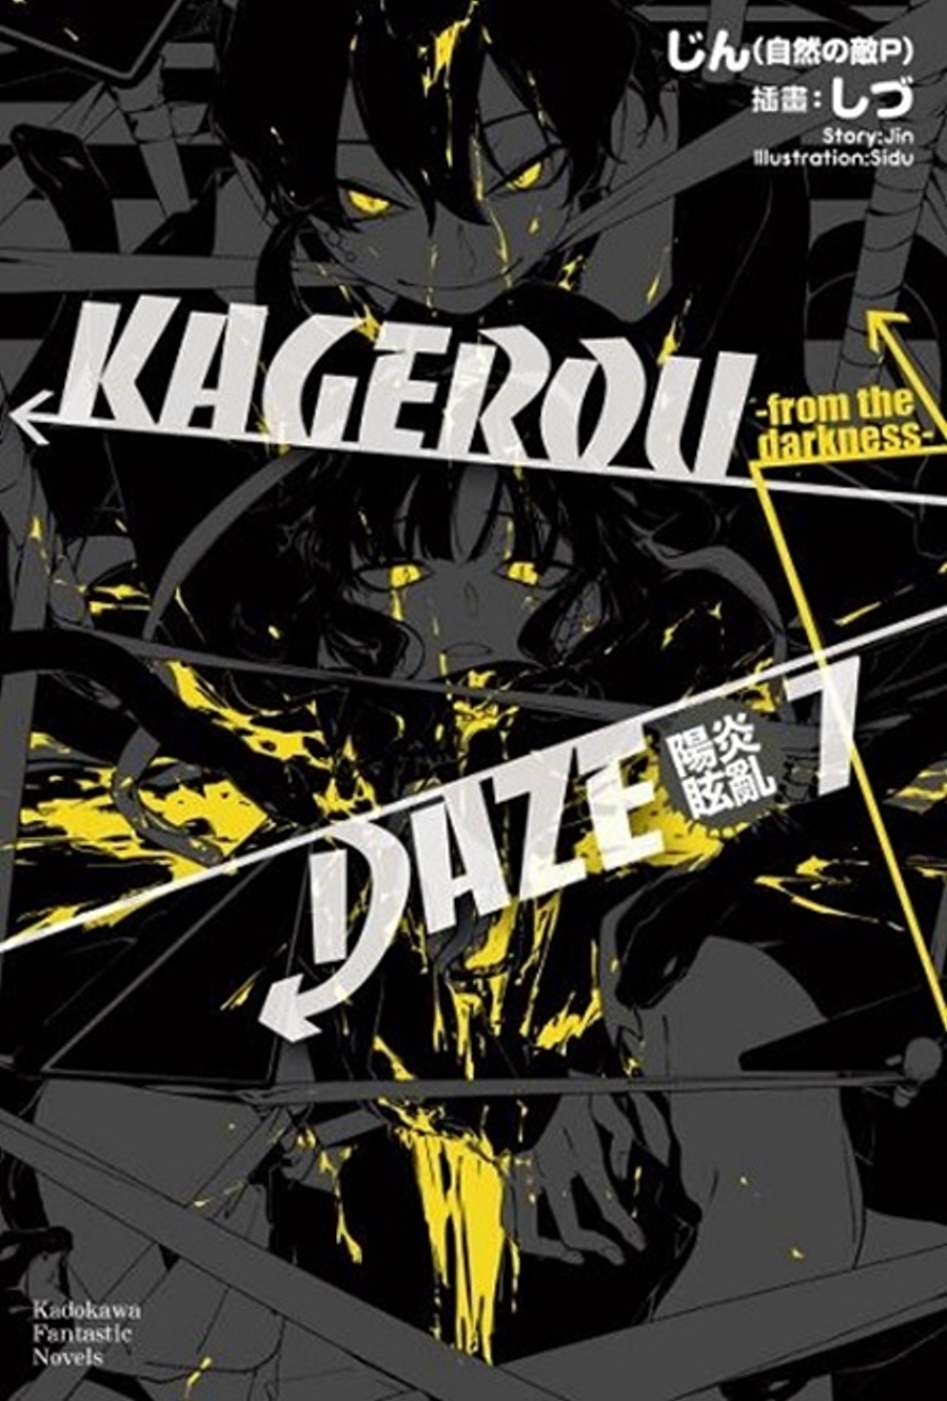 KAGEROU DAZE陽炎眩亂 07 -from the darkness-